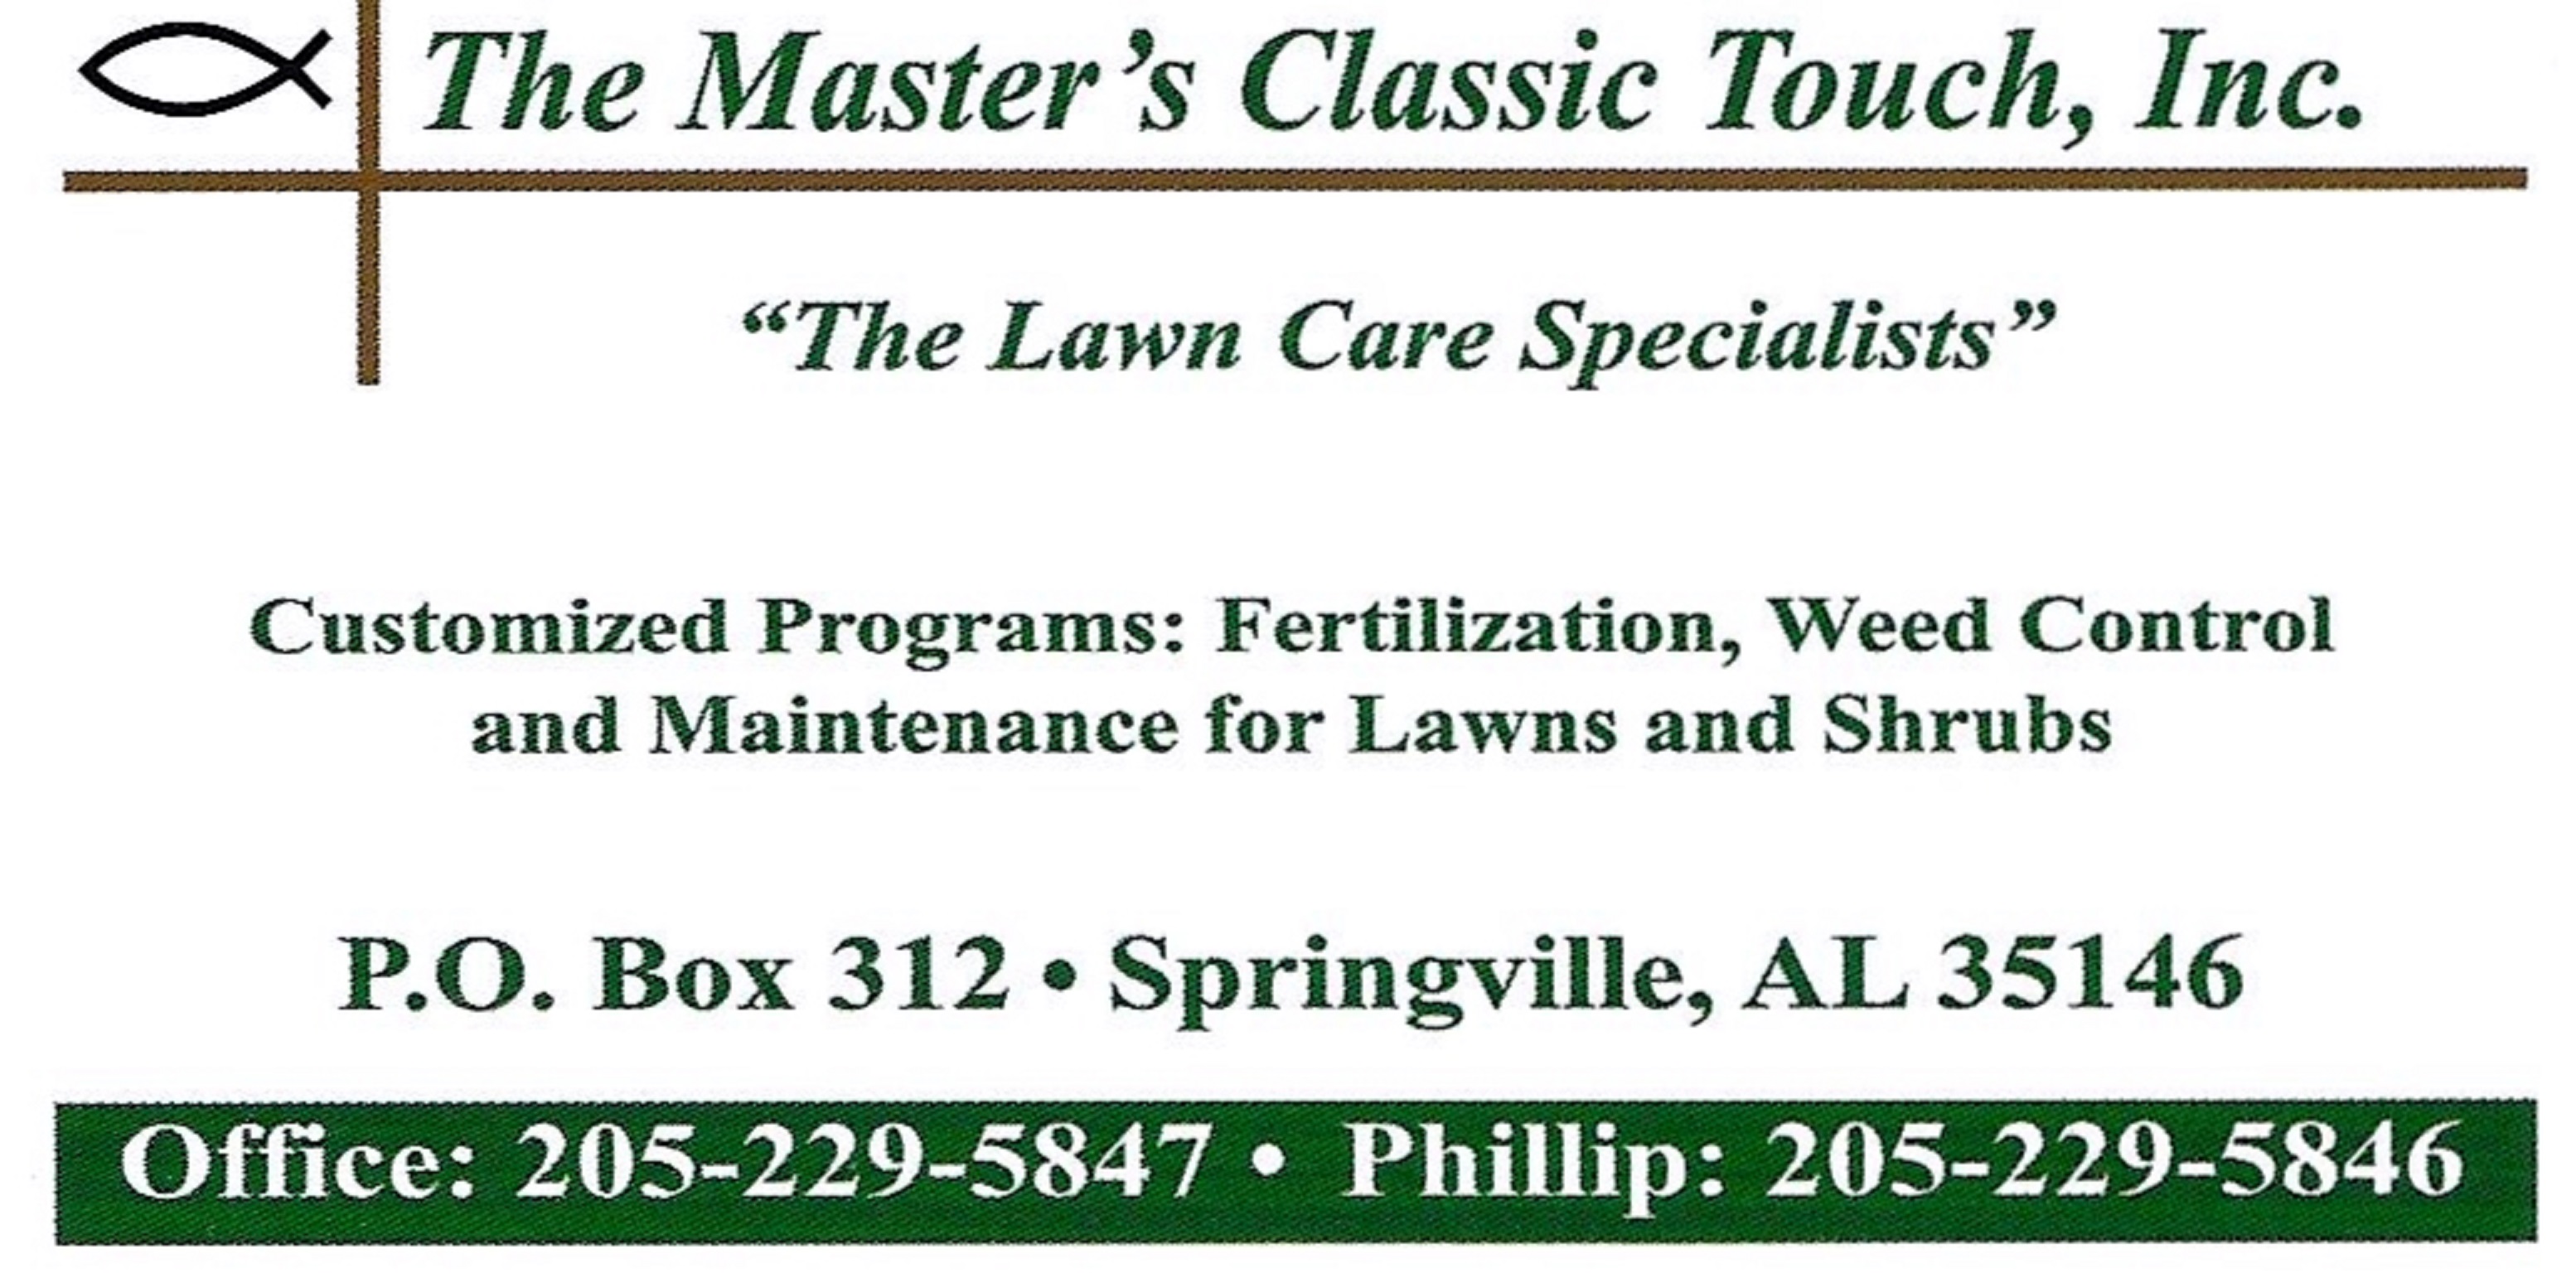 The Master's Classic Touch, Inc. Logo